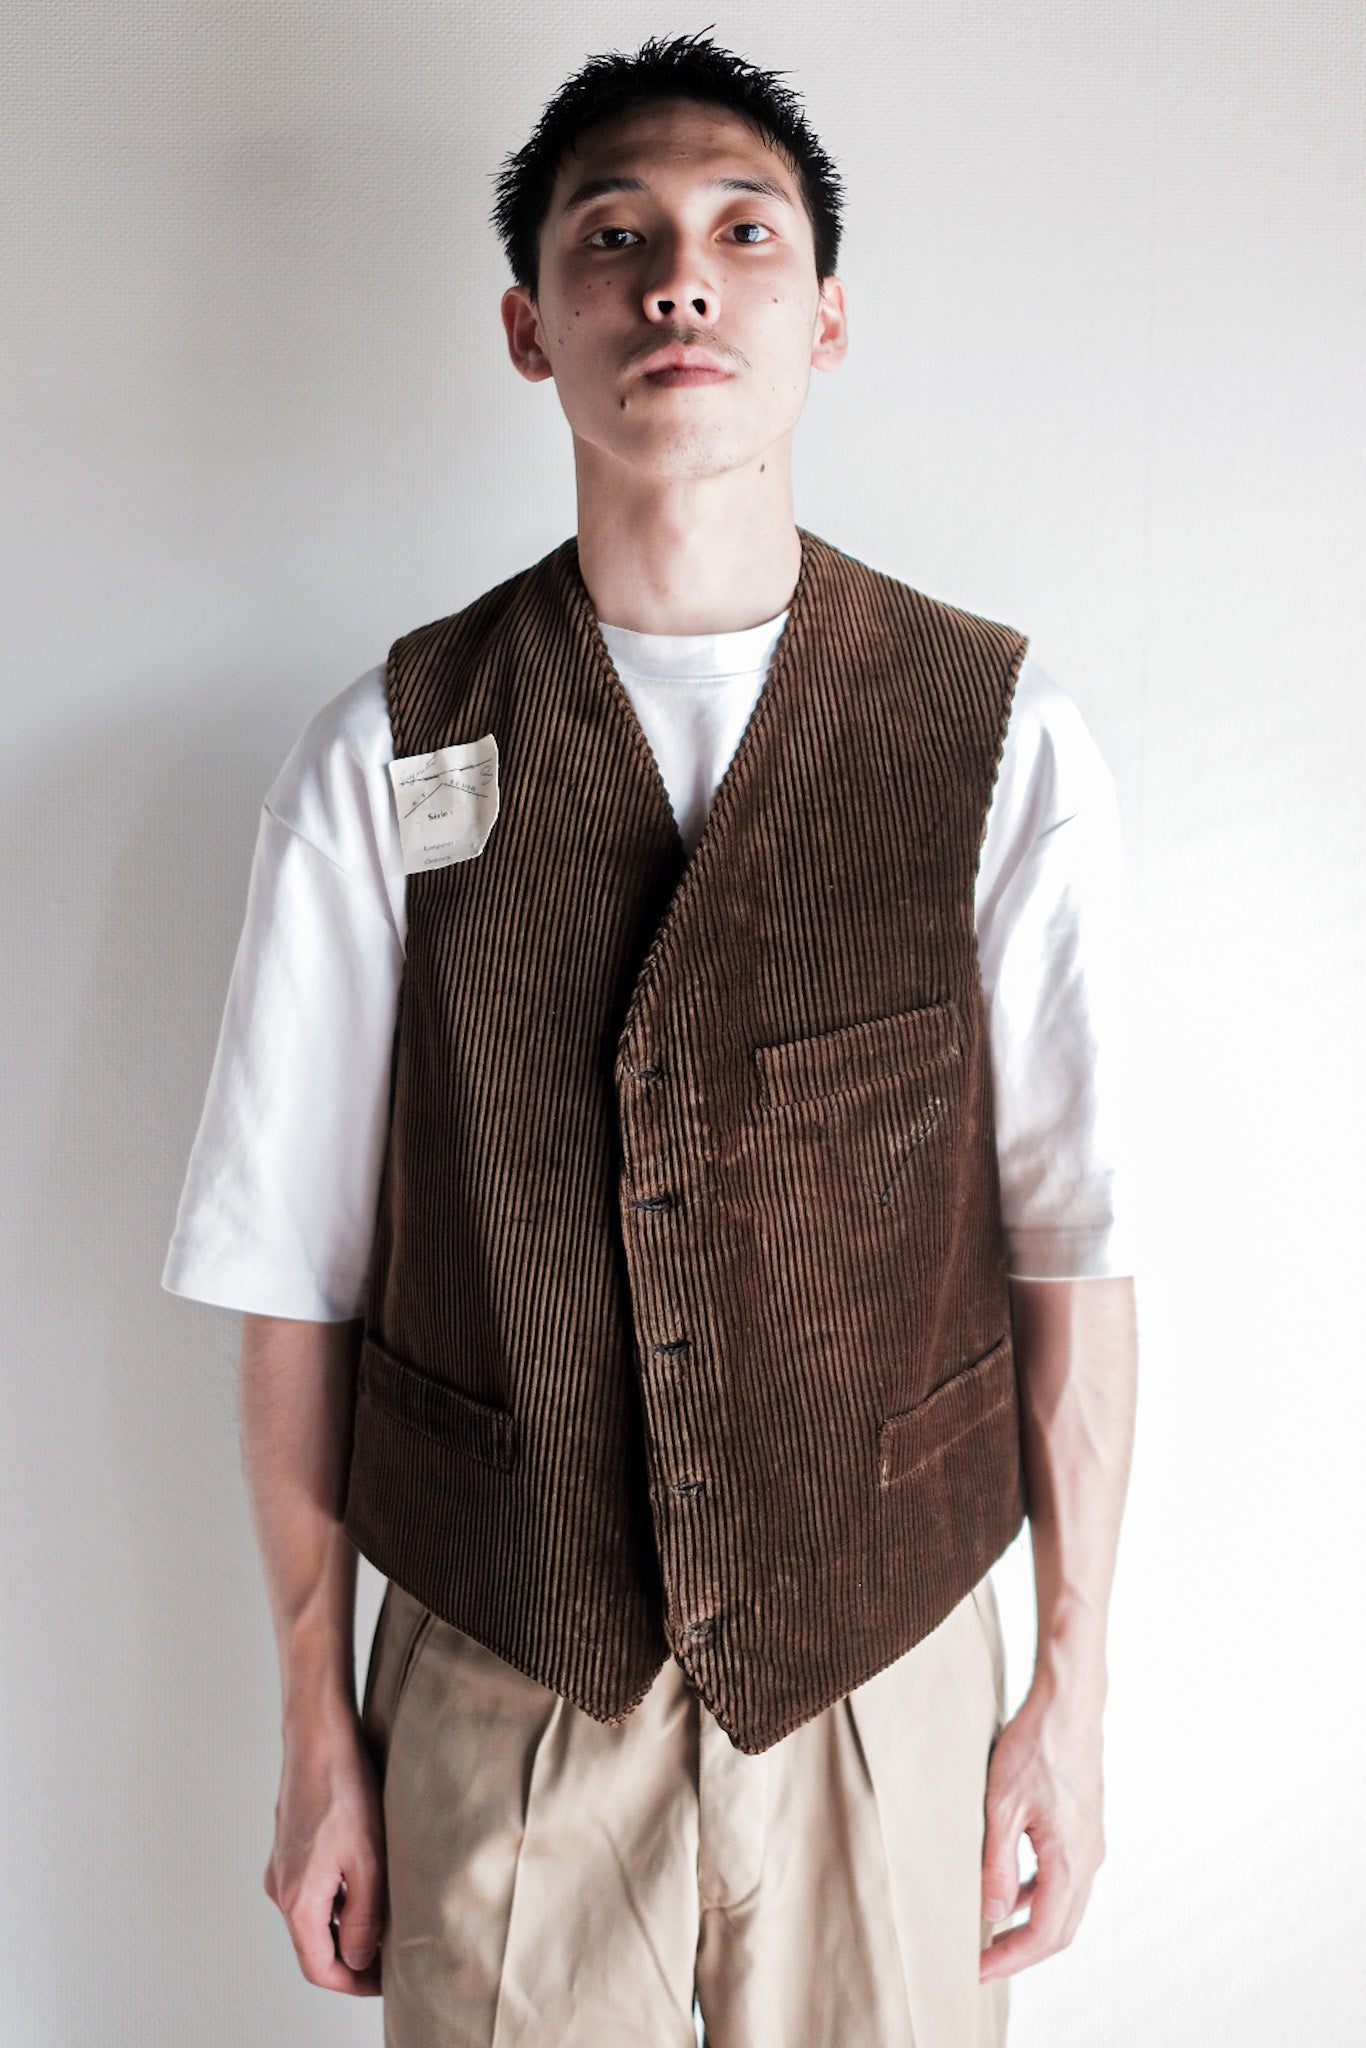 [~ 40's] French Vintage Brown Corduroy Work Gilet "Dead Stock"